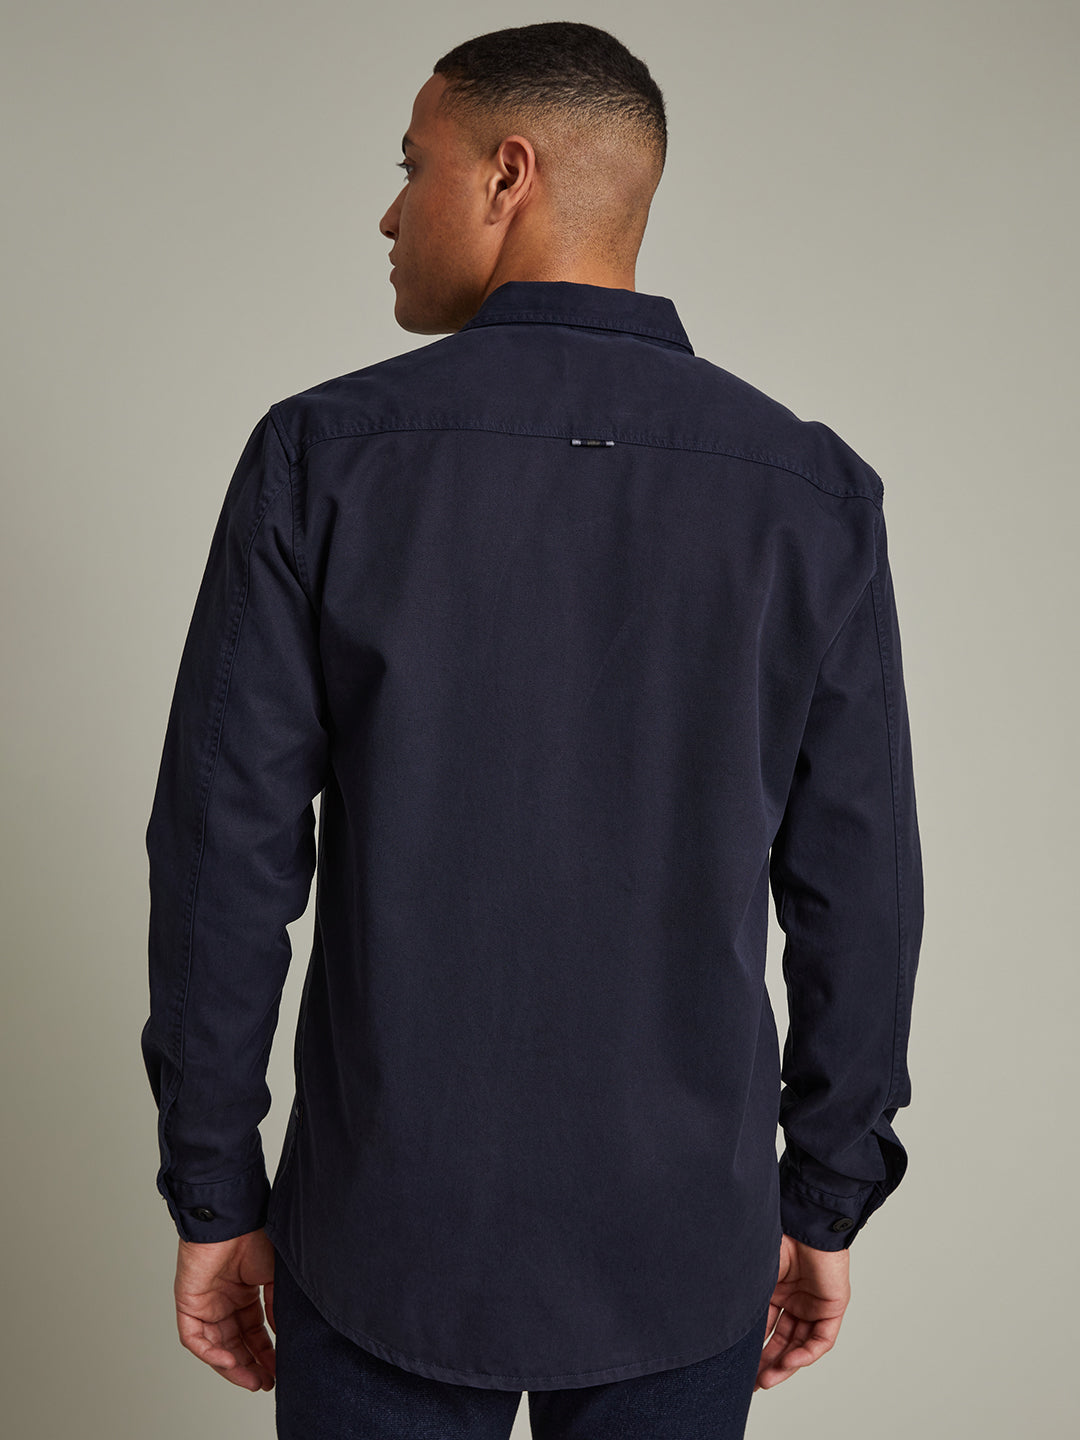 Matinique Navy Blue Relaxed Fit Shirt